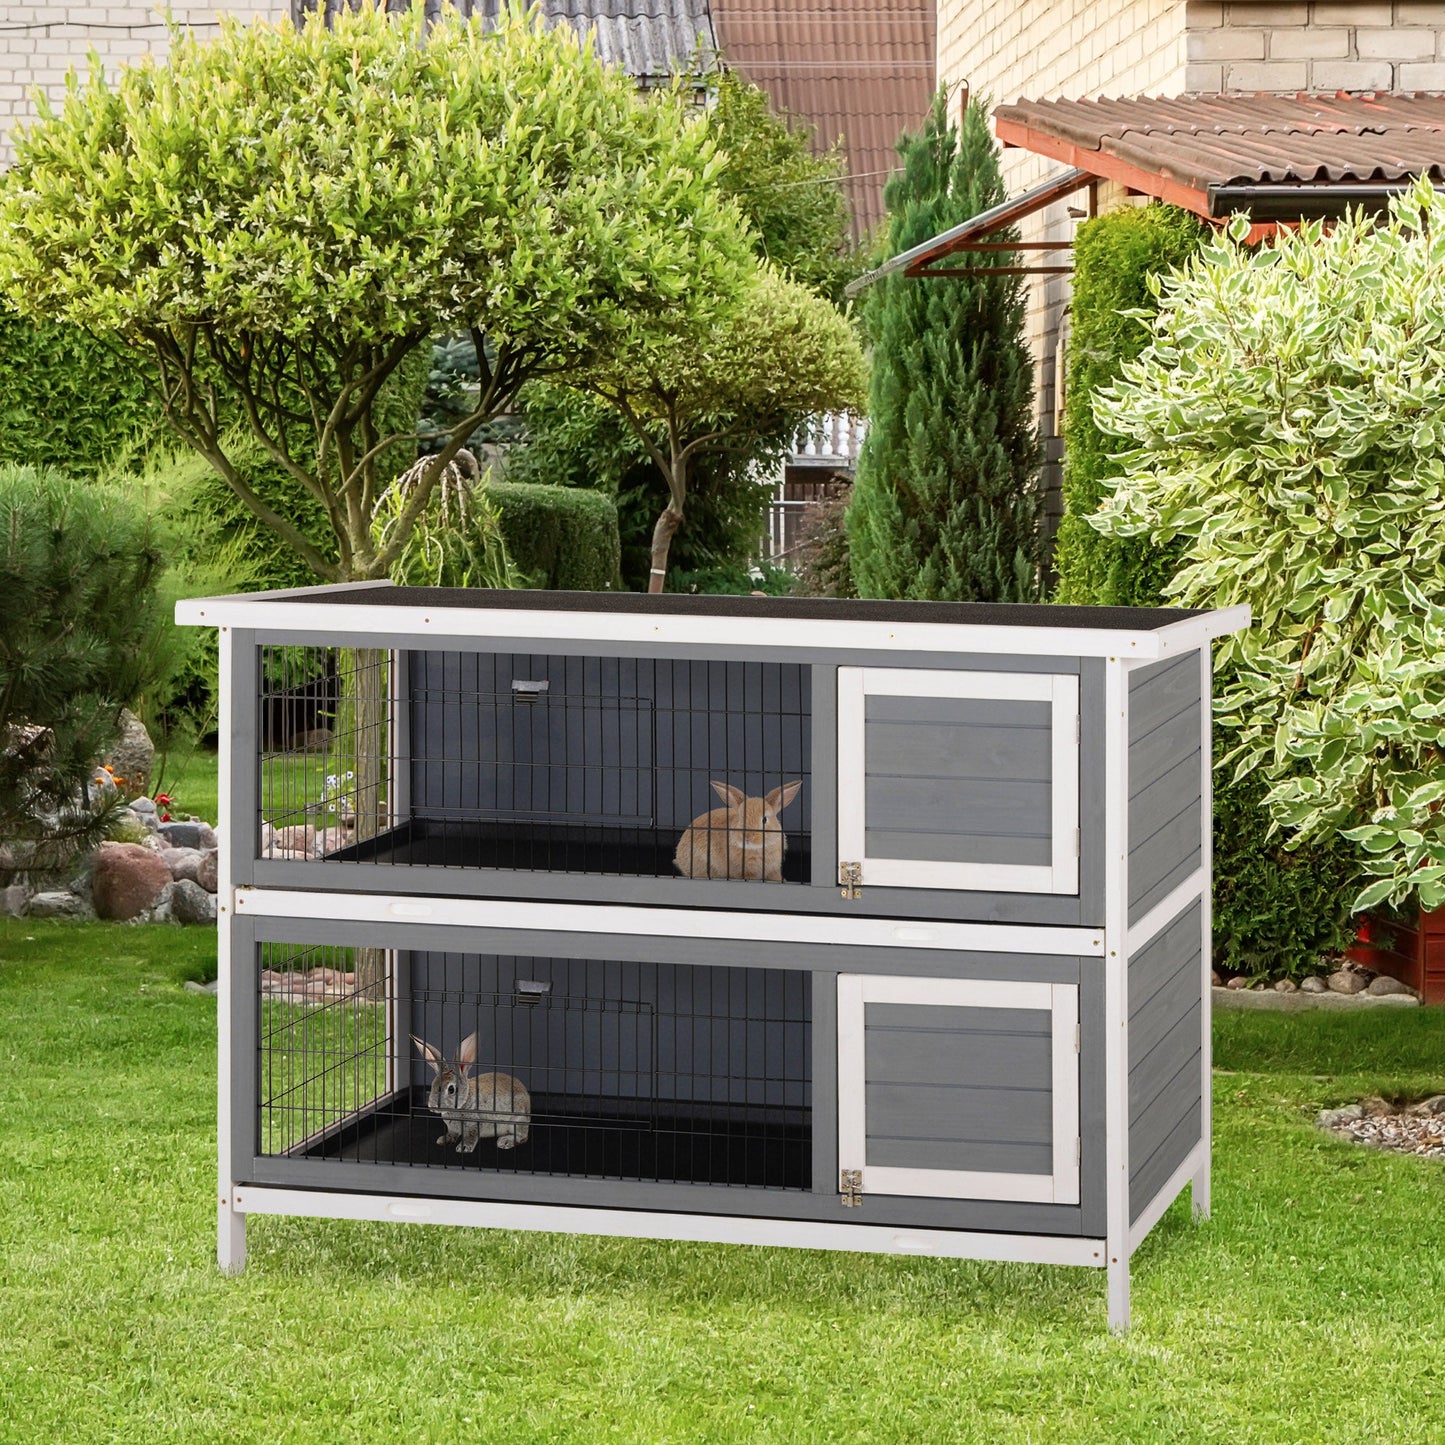 -PawHut 54" 2 Level Large Rabbit House Bunny Hutch with Lockable Doors, No Leak Tray and waterproof Roof for Outdoor, Dark Grey - Outdoor Style Company